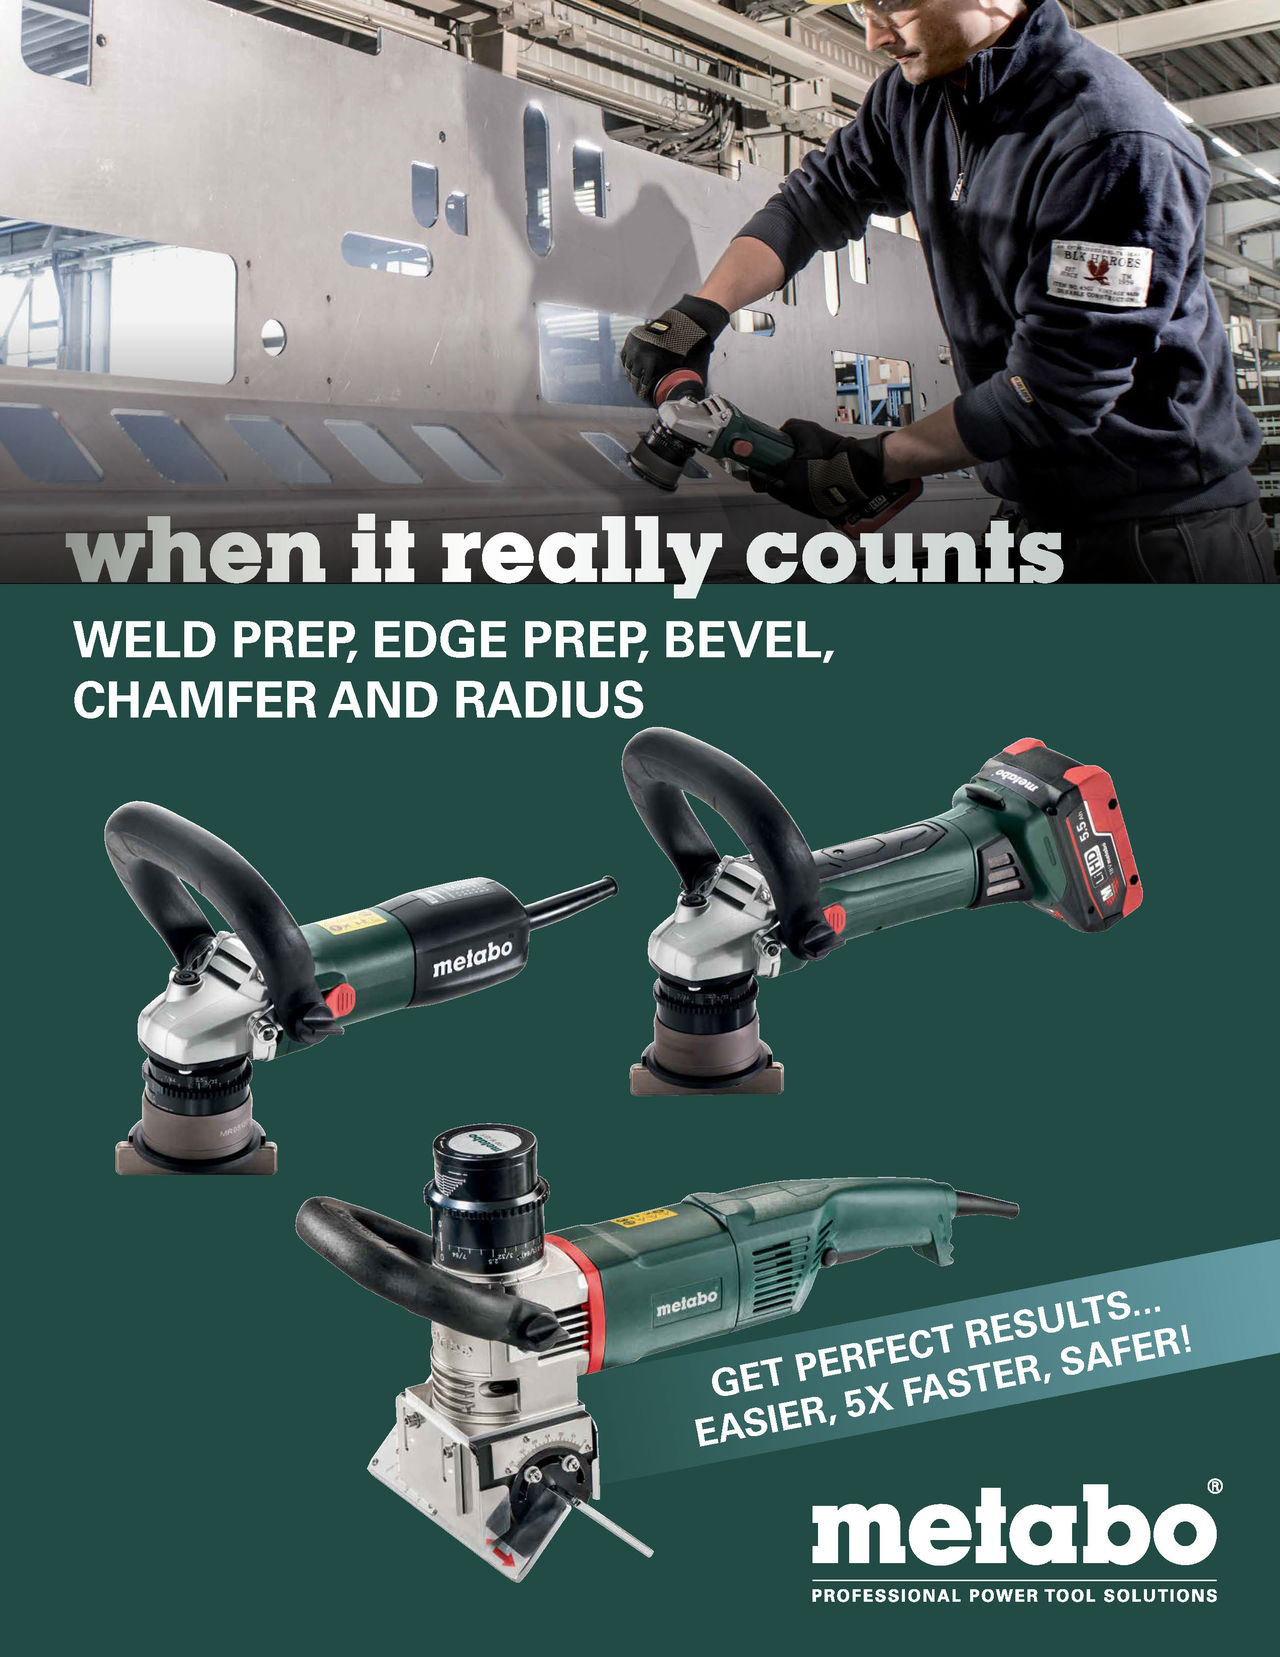 Catalogues / Brochures | Metabo Power Tools